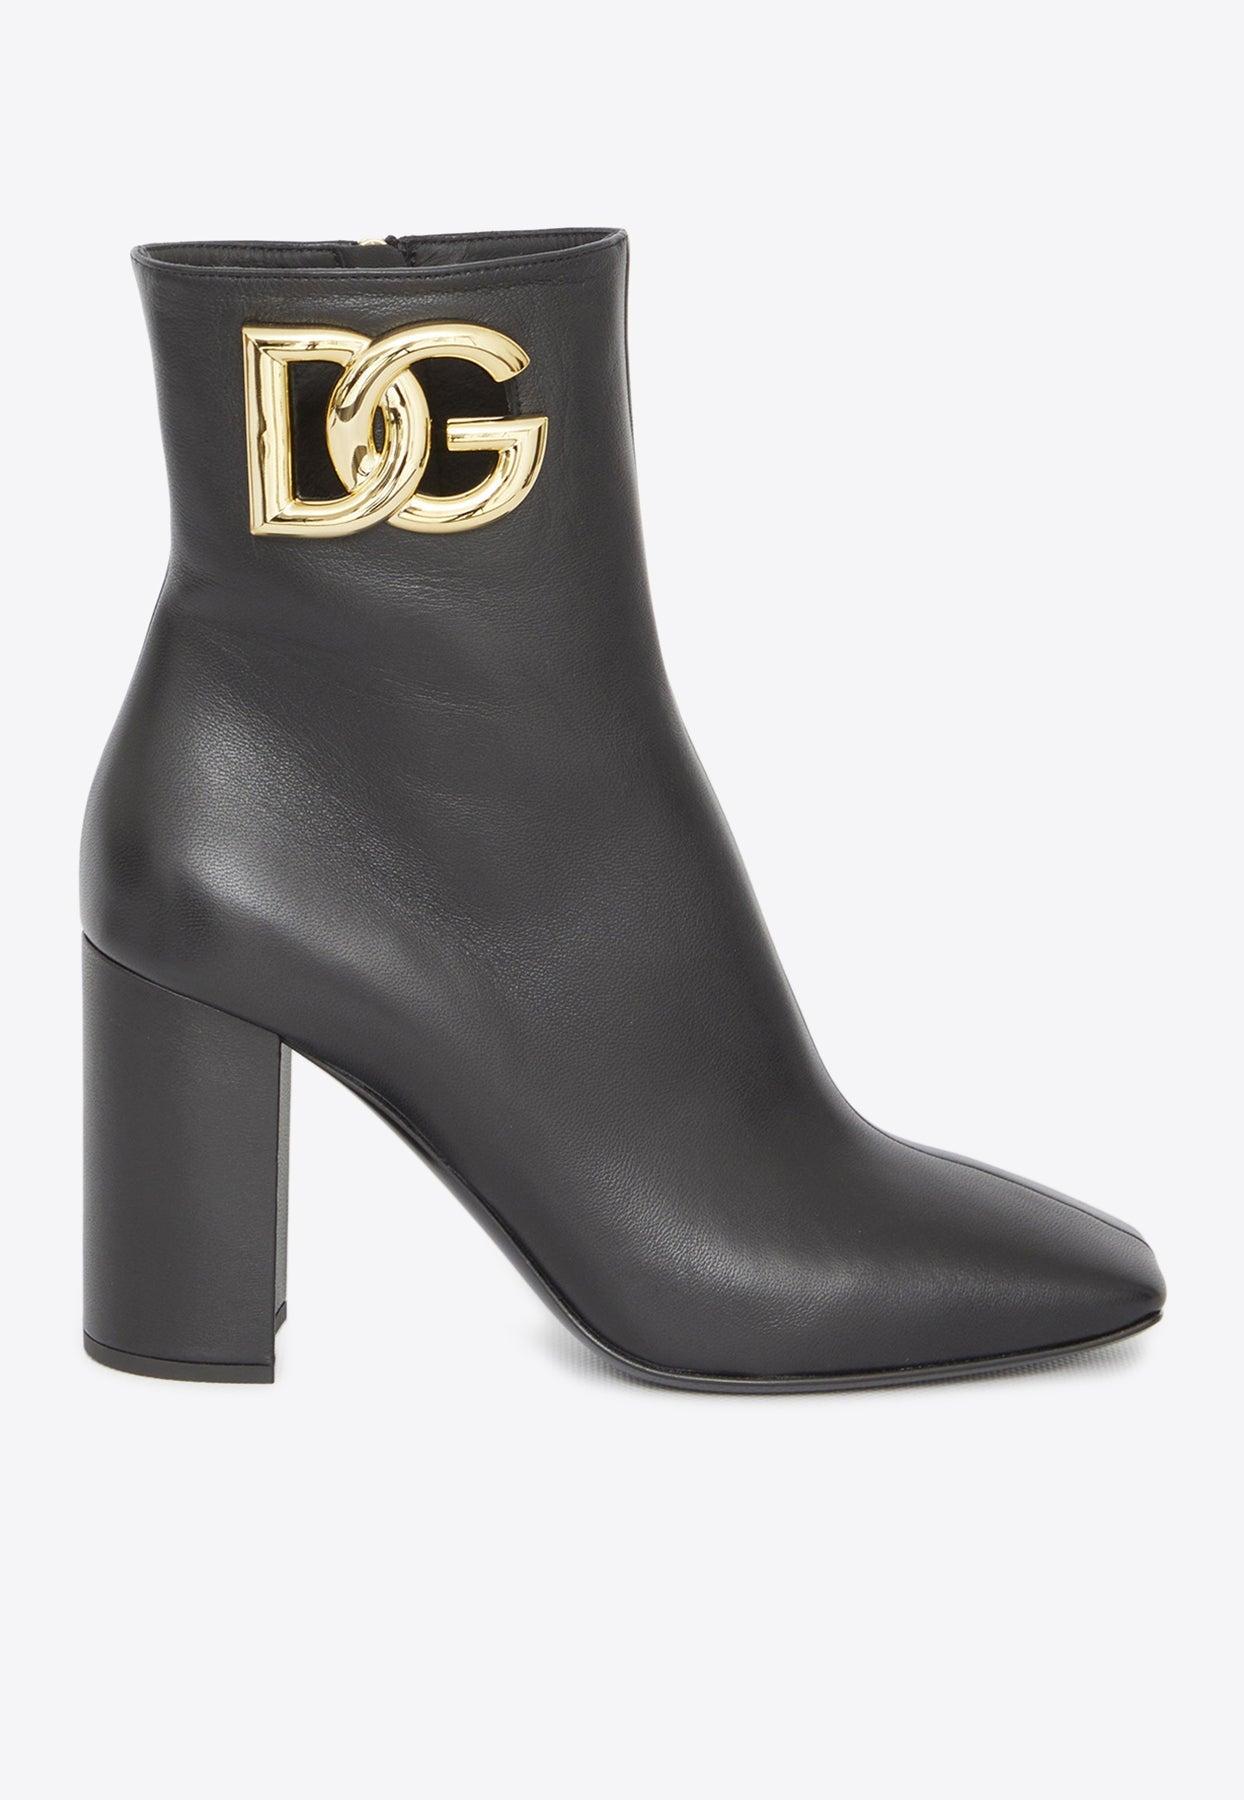 Dolce & Gabbana Jackie 90 Dg Logo Ankle Boots in Gray | Lyst